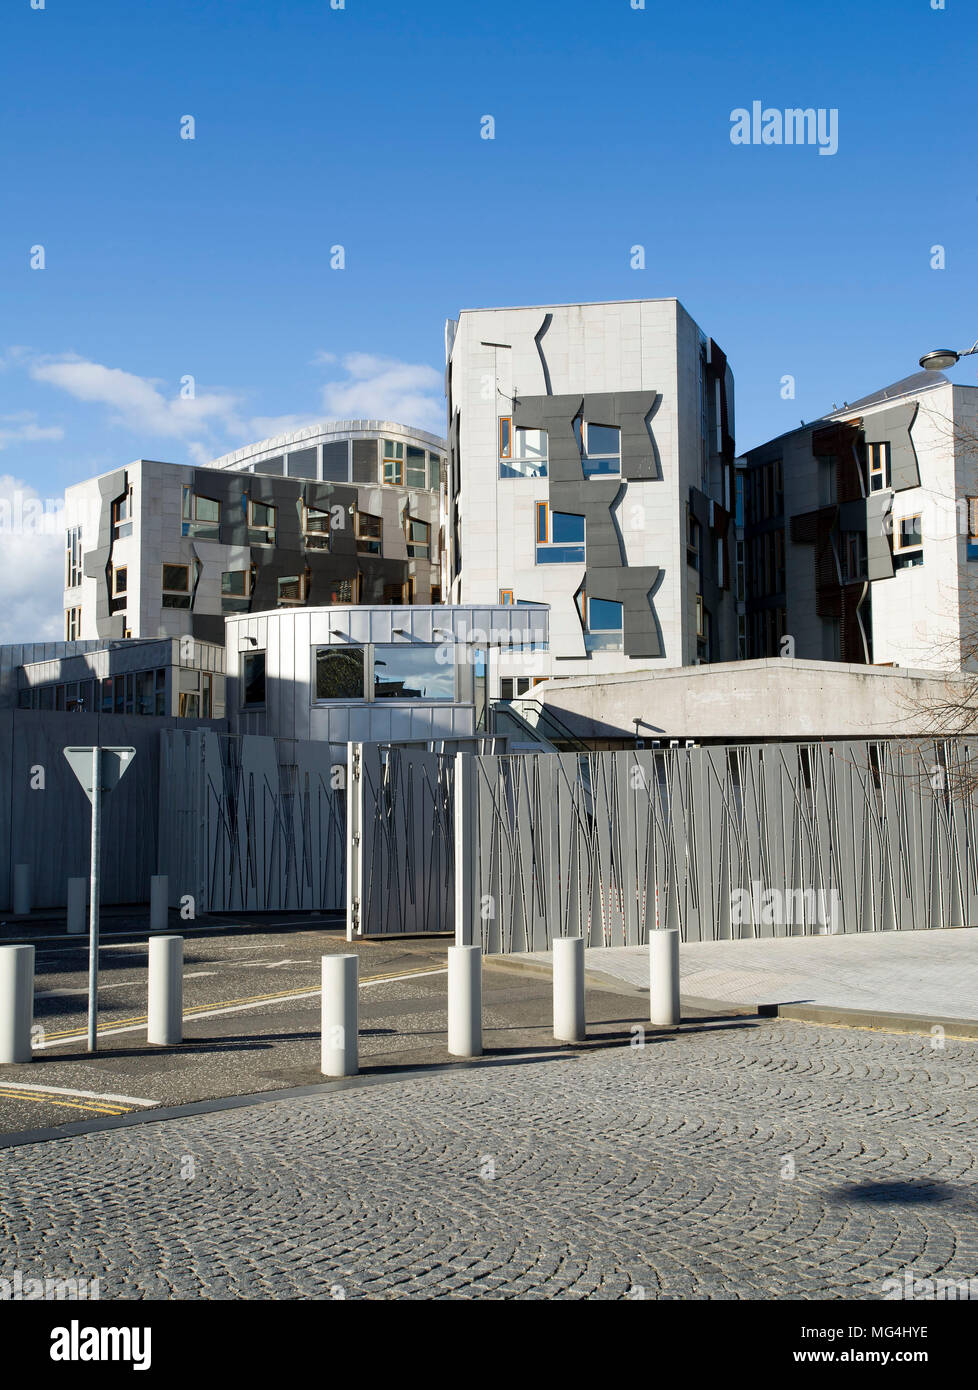 View of exterior of Scottish Parliament building at Holyrood in Edinburgh, Scotland, United Kingdom. Stock Photo